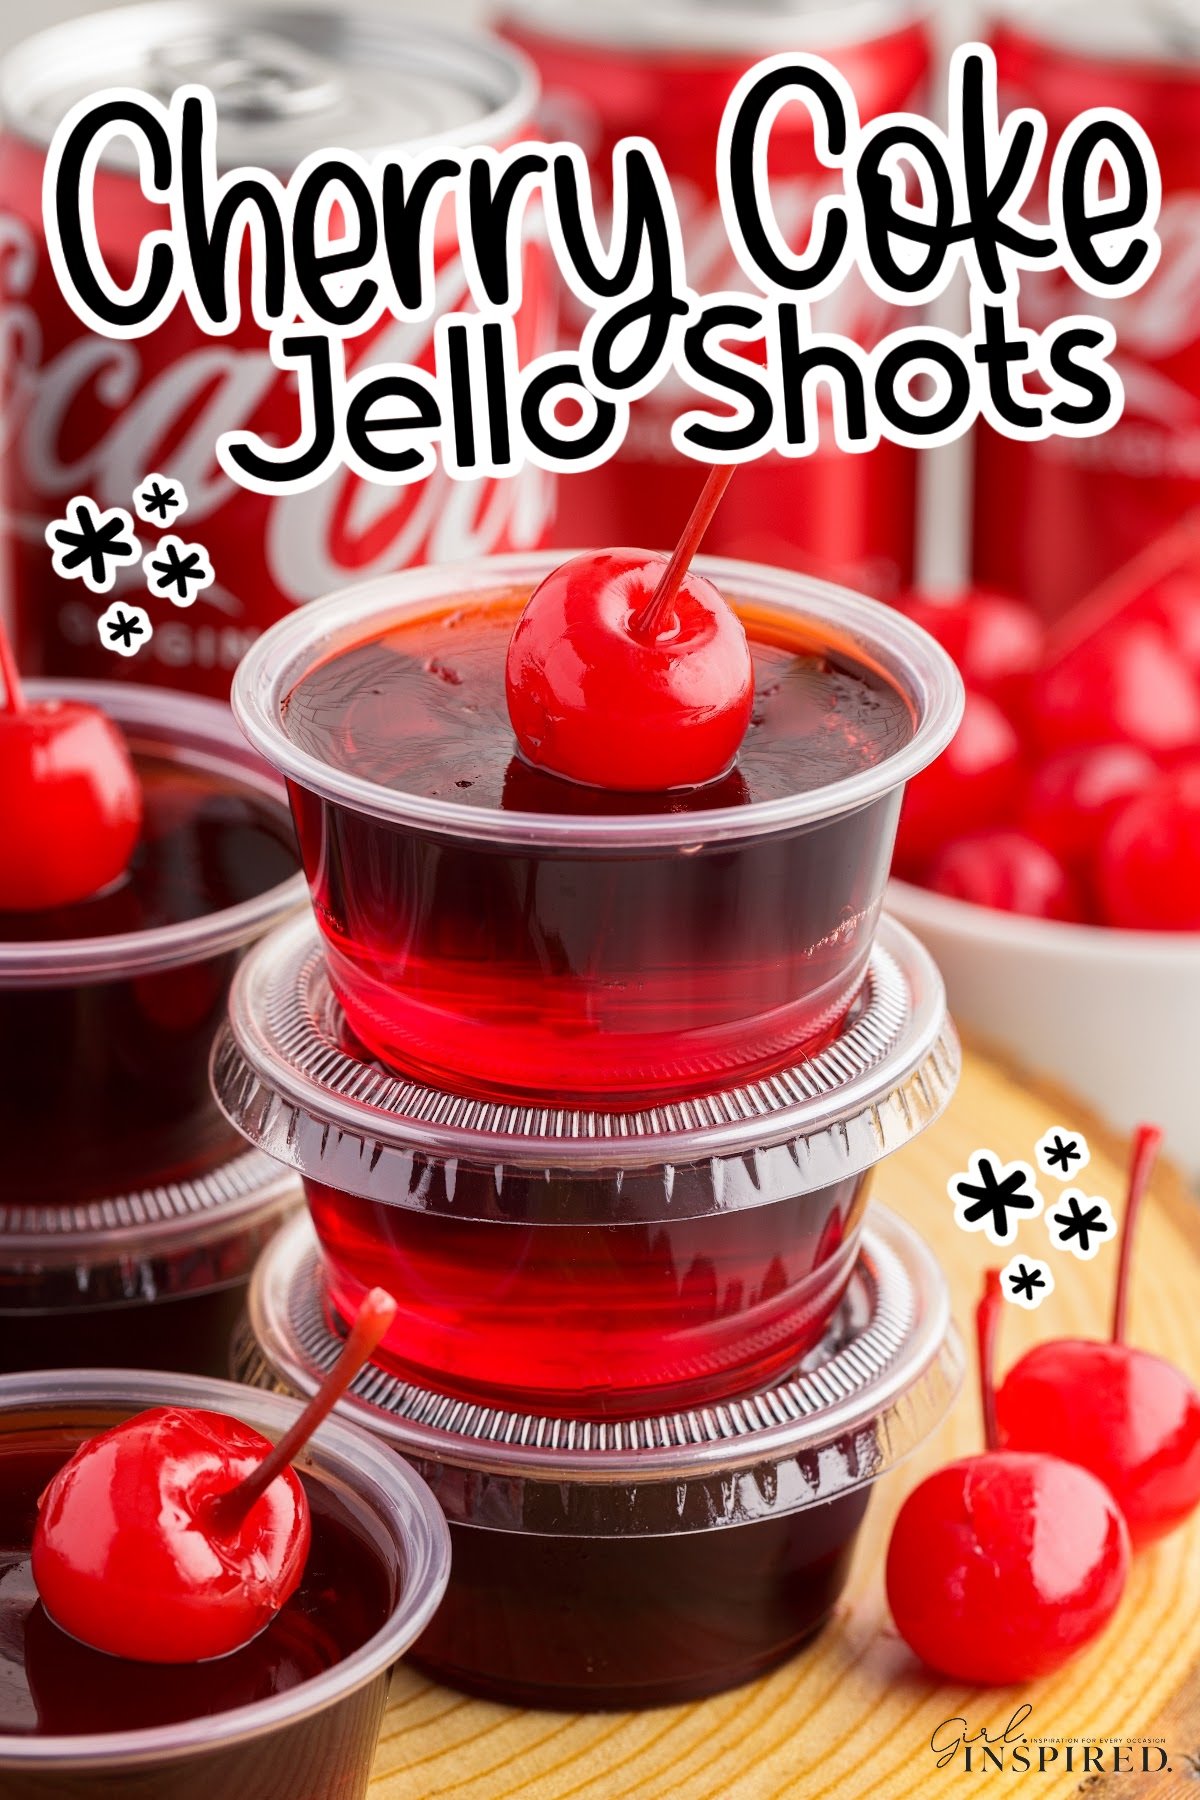 Three Cherry Coke Jello Shots stacked on each other with text overlay.